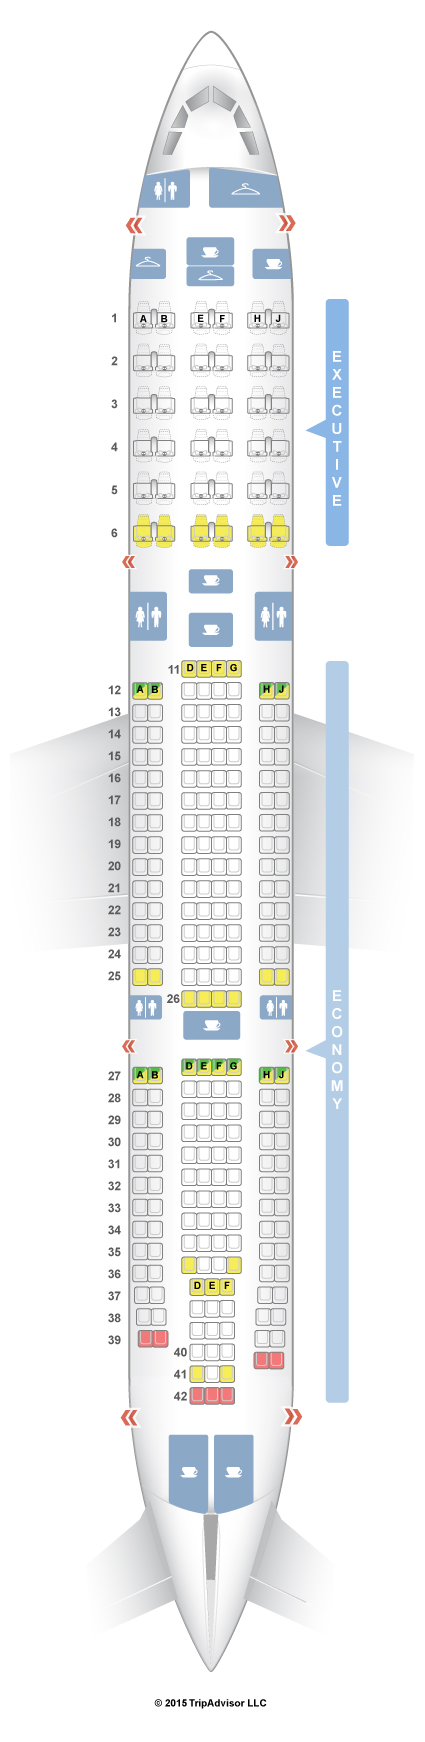 Airbus A340 Seating Chart Hifly